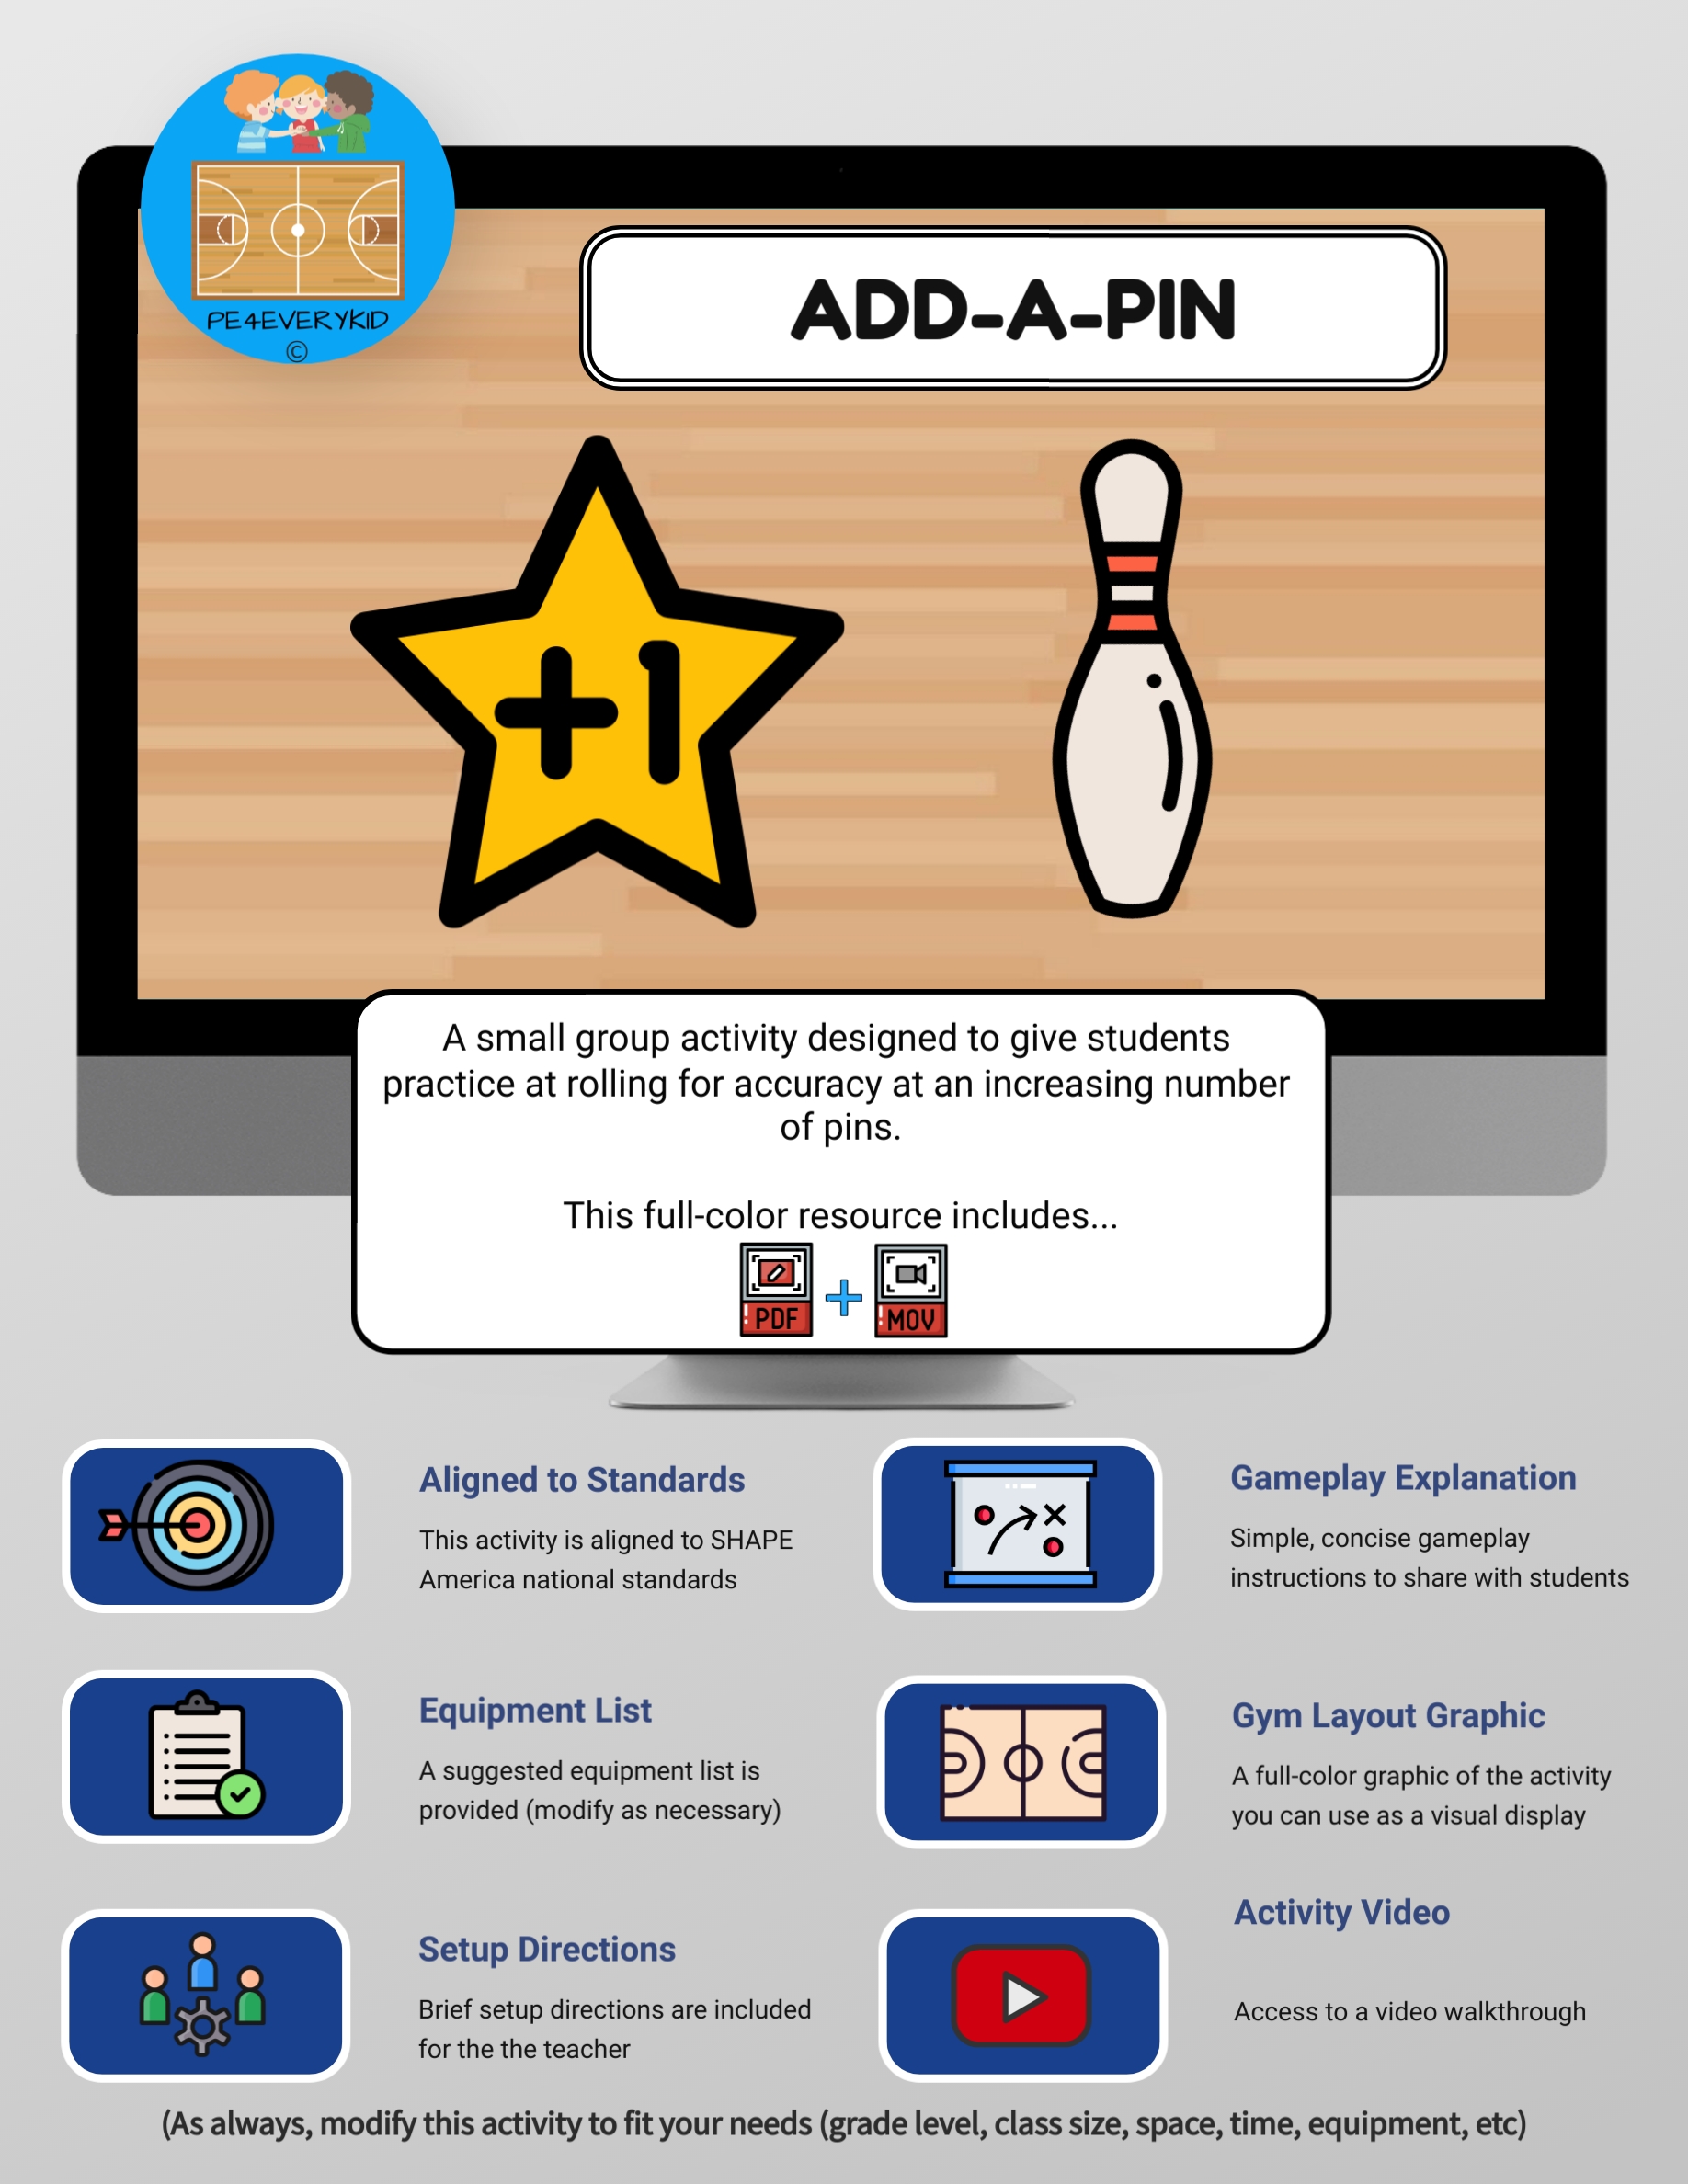 Pin on Classroom games